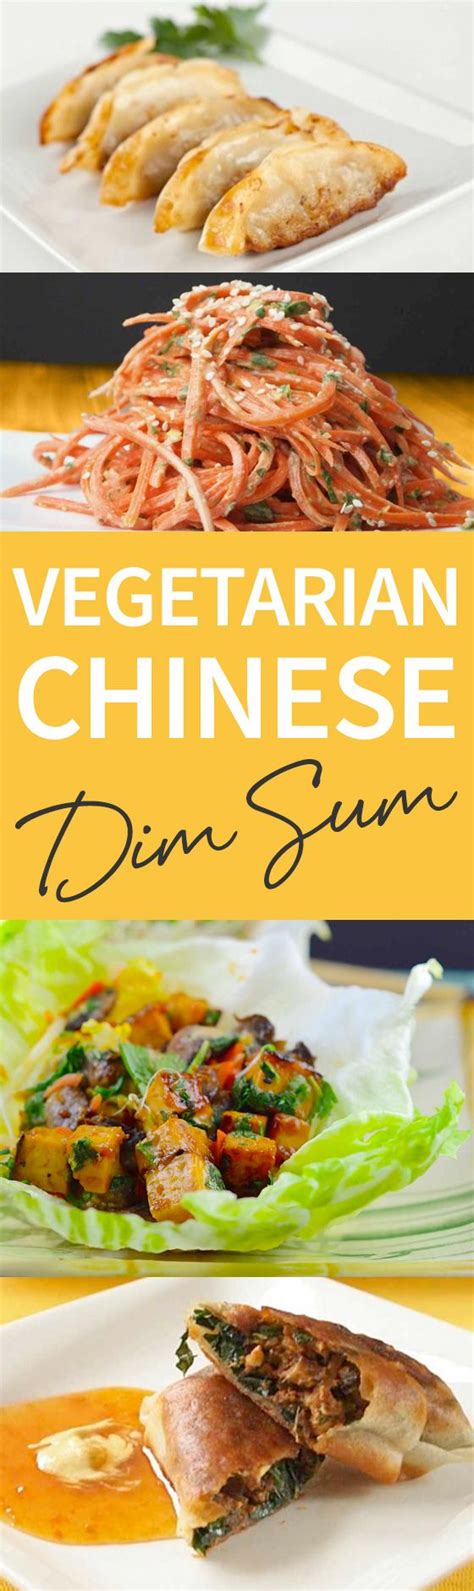 These are also known as dim sum and are basically dumplings made from flour with a savory stuffing. Vegetarian Chinese Dim Sum | Vegetarian dim sum, Vegetarian, Vegetarian recipes